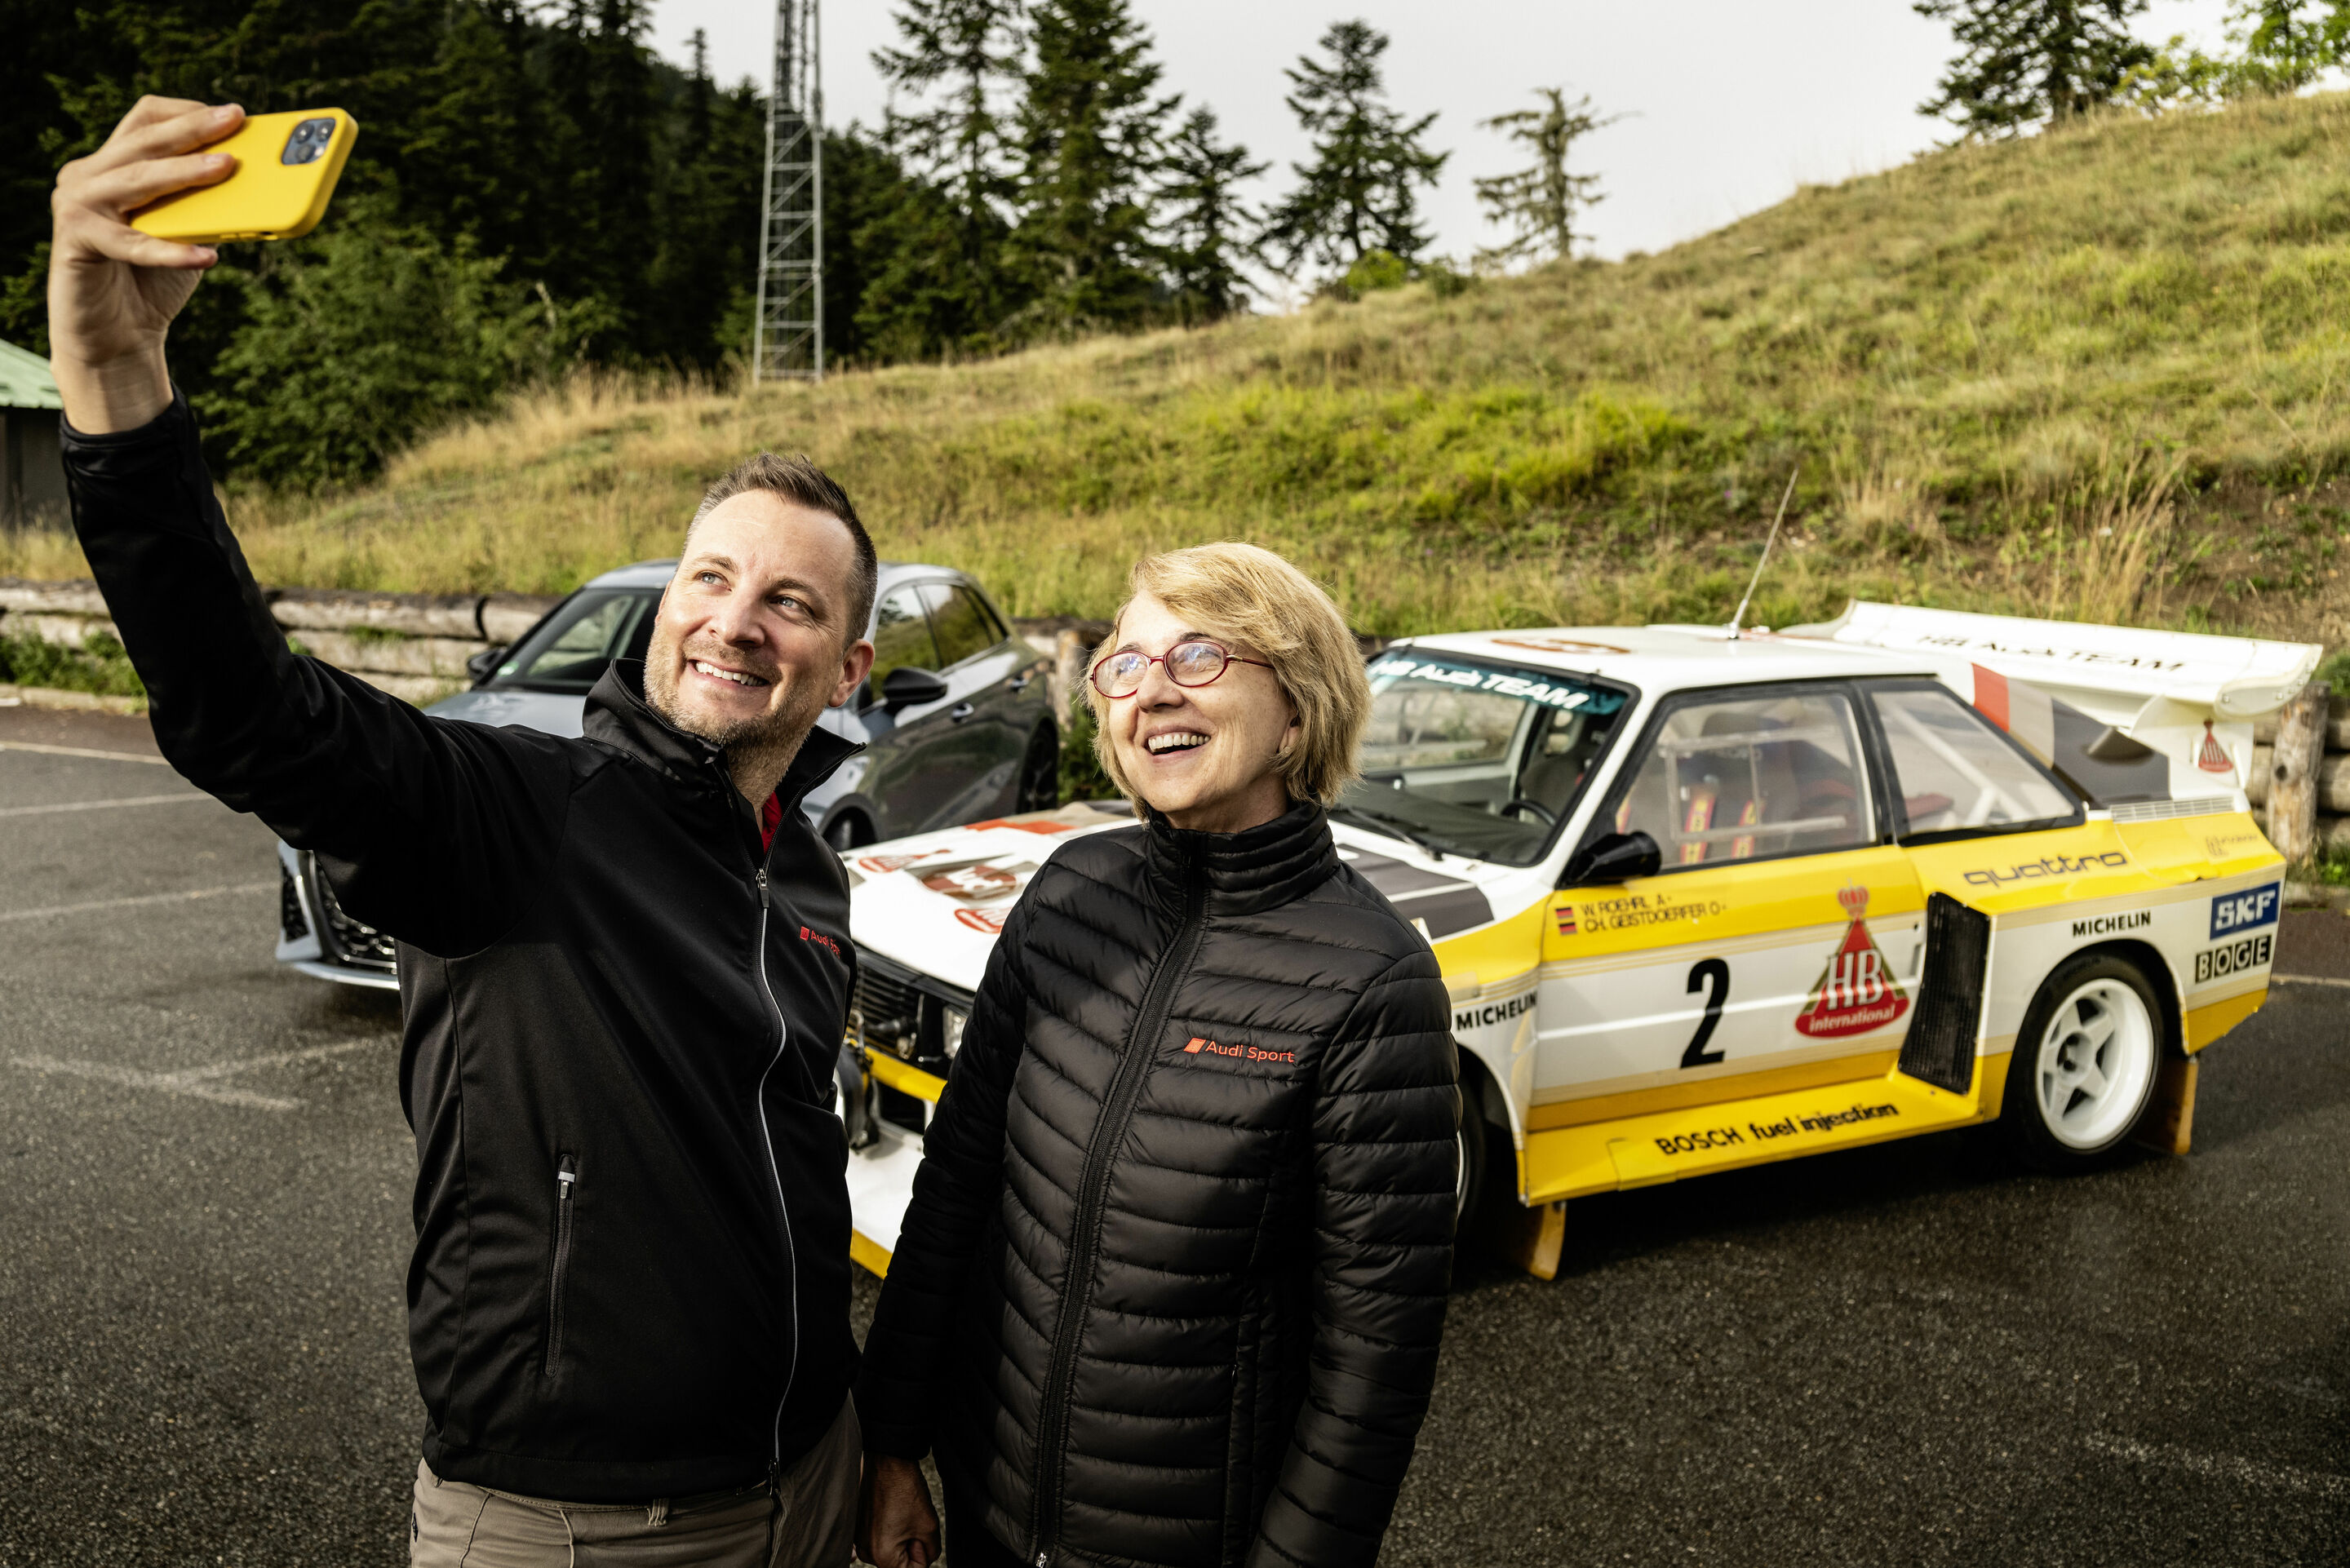 Rally co-driver Fabrizia Pons: “The quattro has never lost its grip on me”